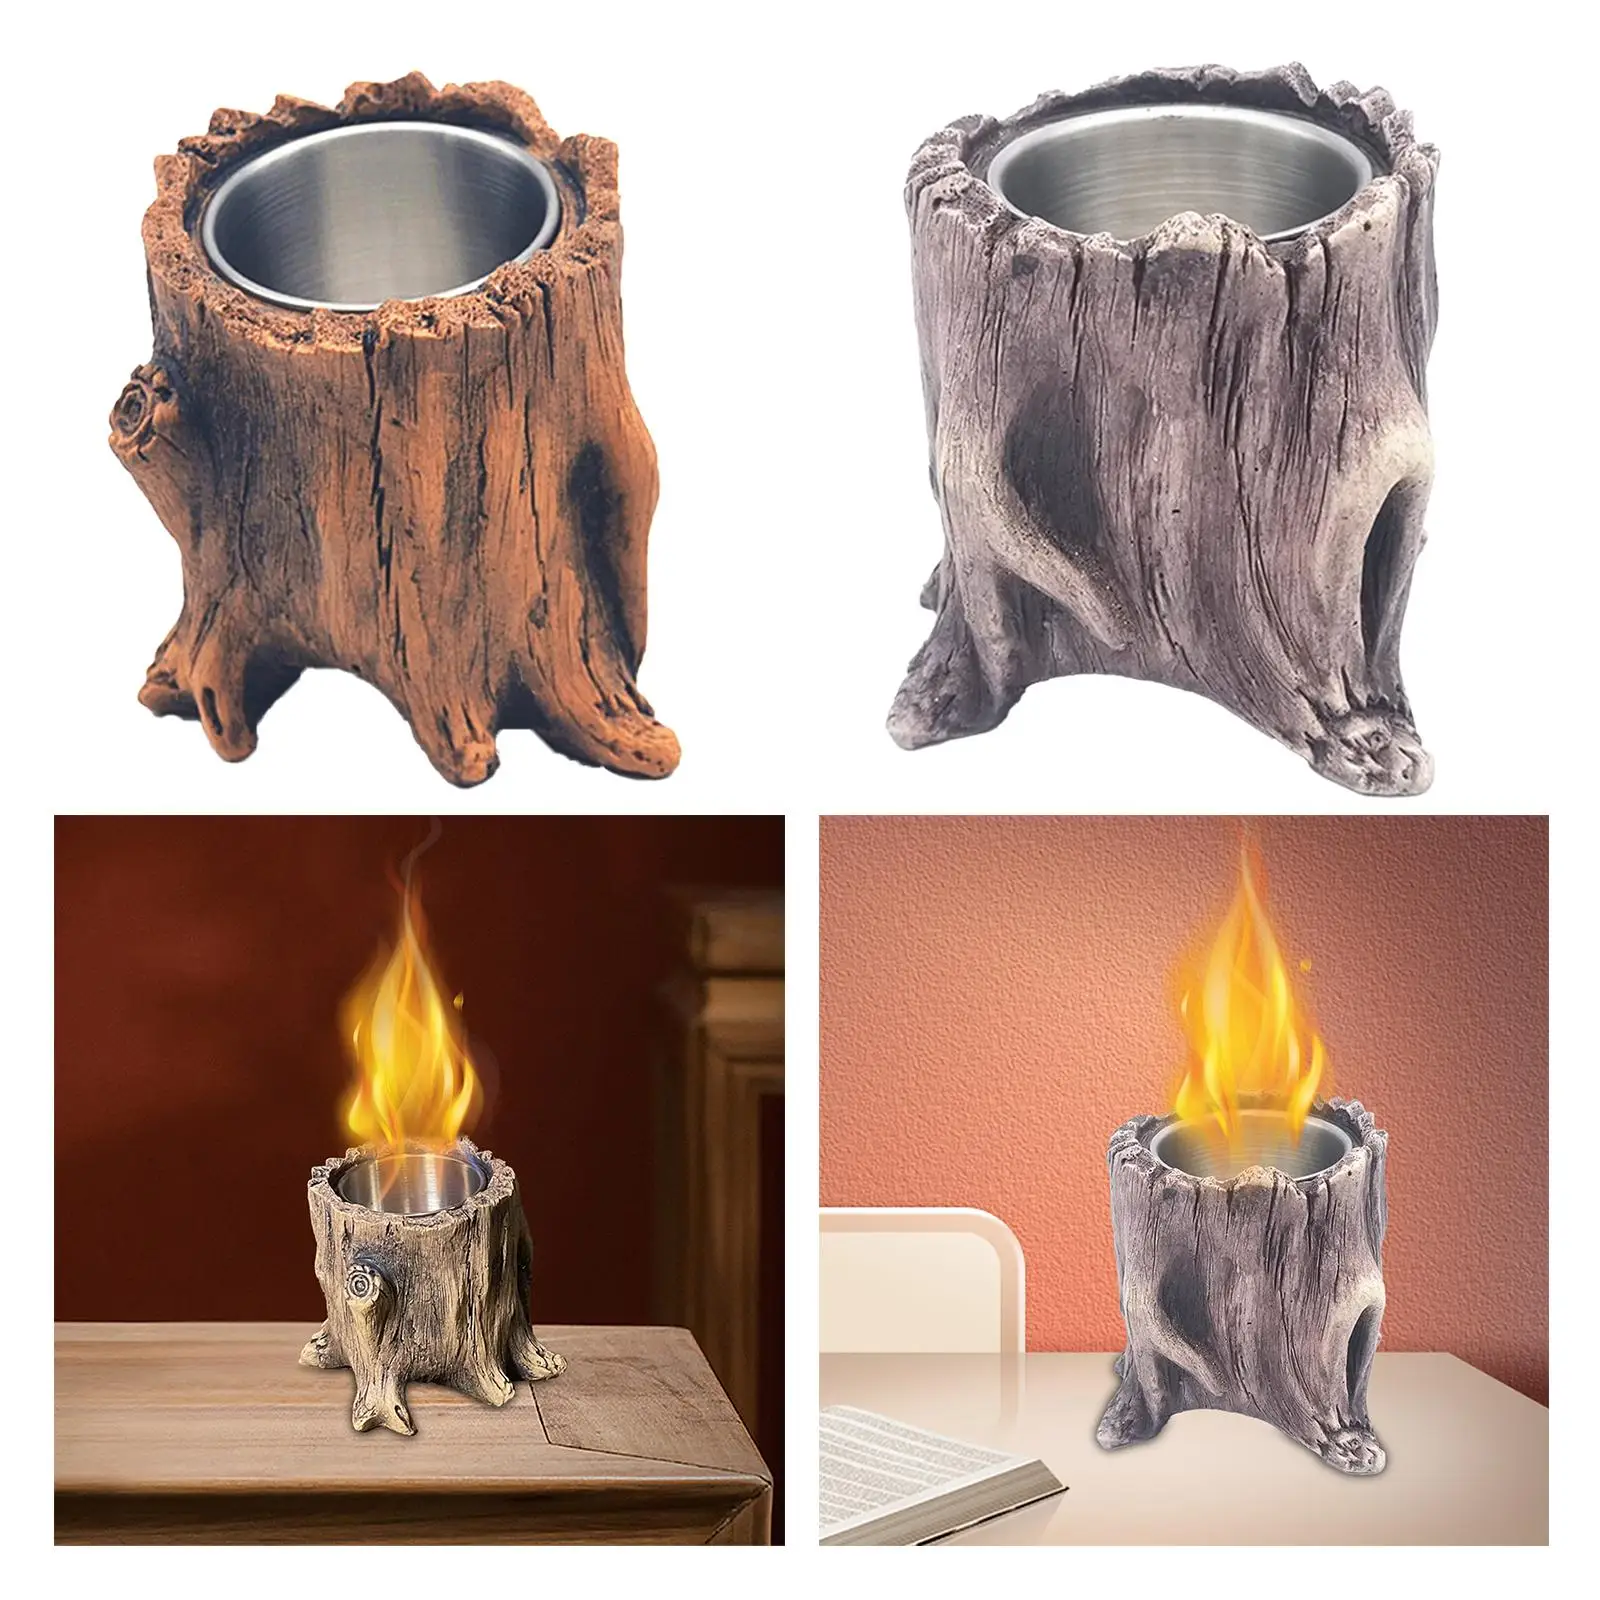 Tabletop Fire Pit Alcohol Fireplace Tree Stump Long Burning Warm Desk Stove Fire Concrete Bowl Pot Flame Bowl for Living Room